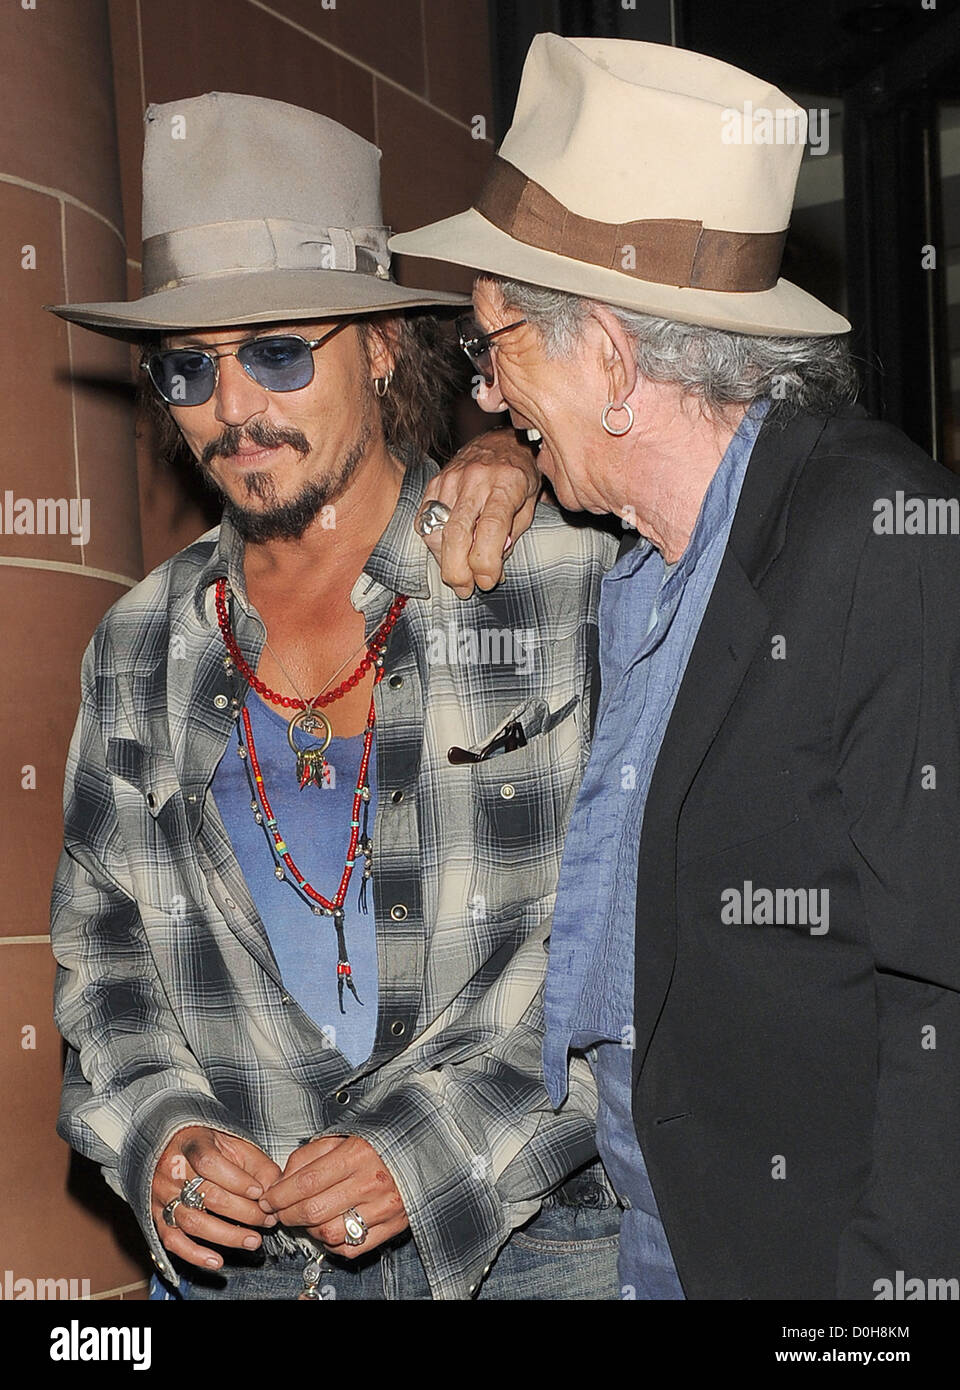 Johnny Depp and Keith Richards both wearing fedora hats and sunglasses  leaving 'C London' restaurant. Depp was sporting some Stock Photo - Alamy